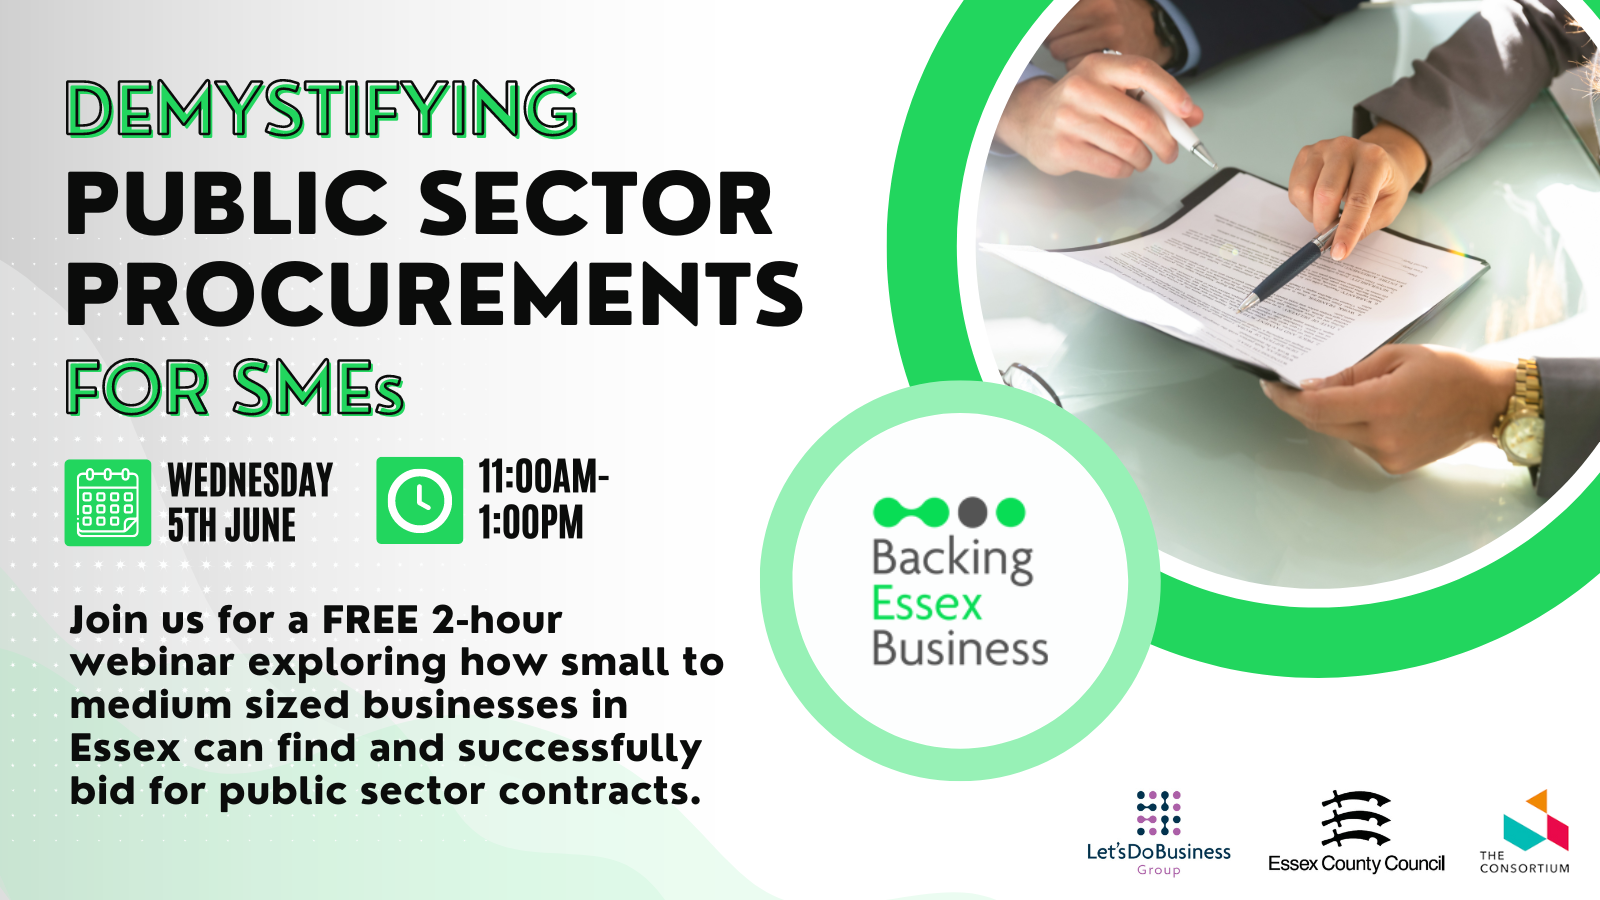 Demystifying Public Sector Procurements for SMEs